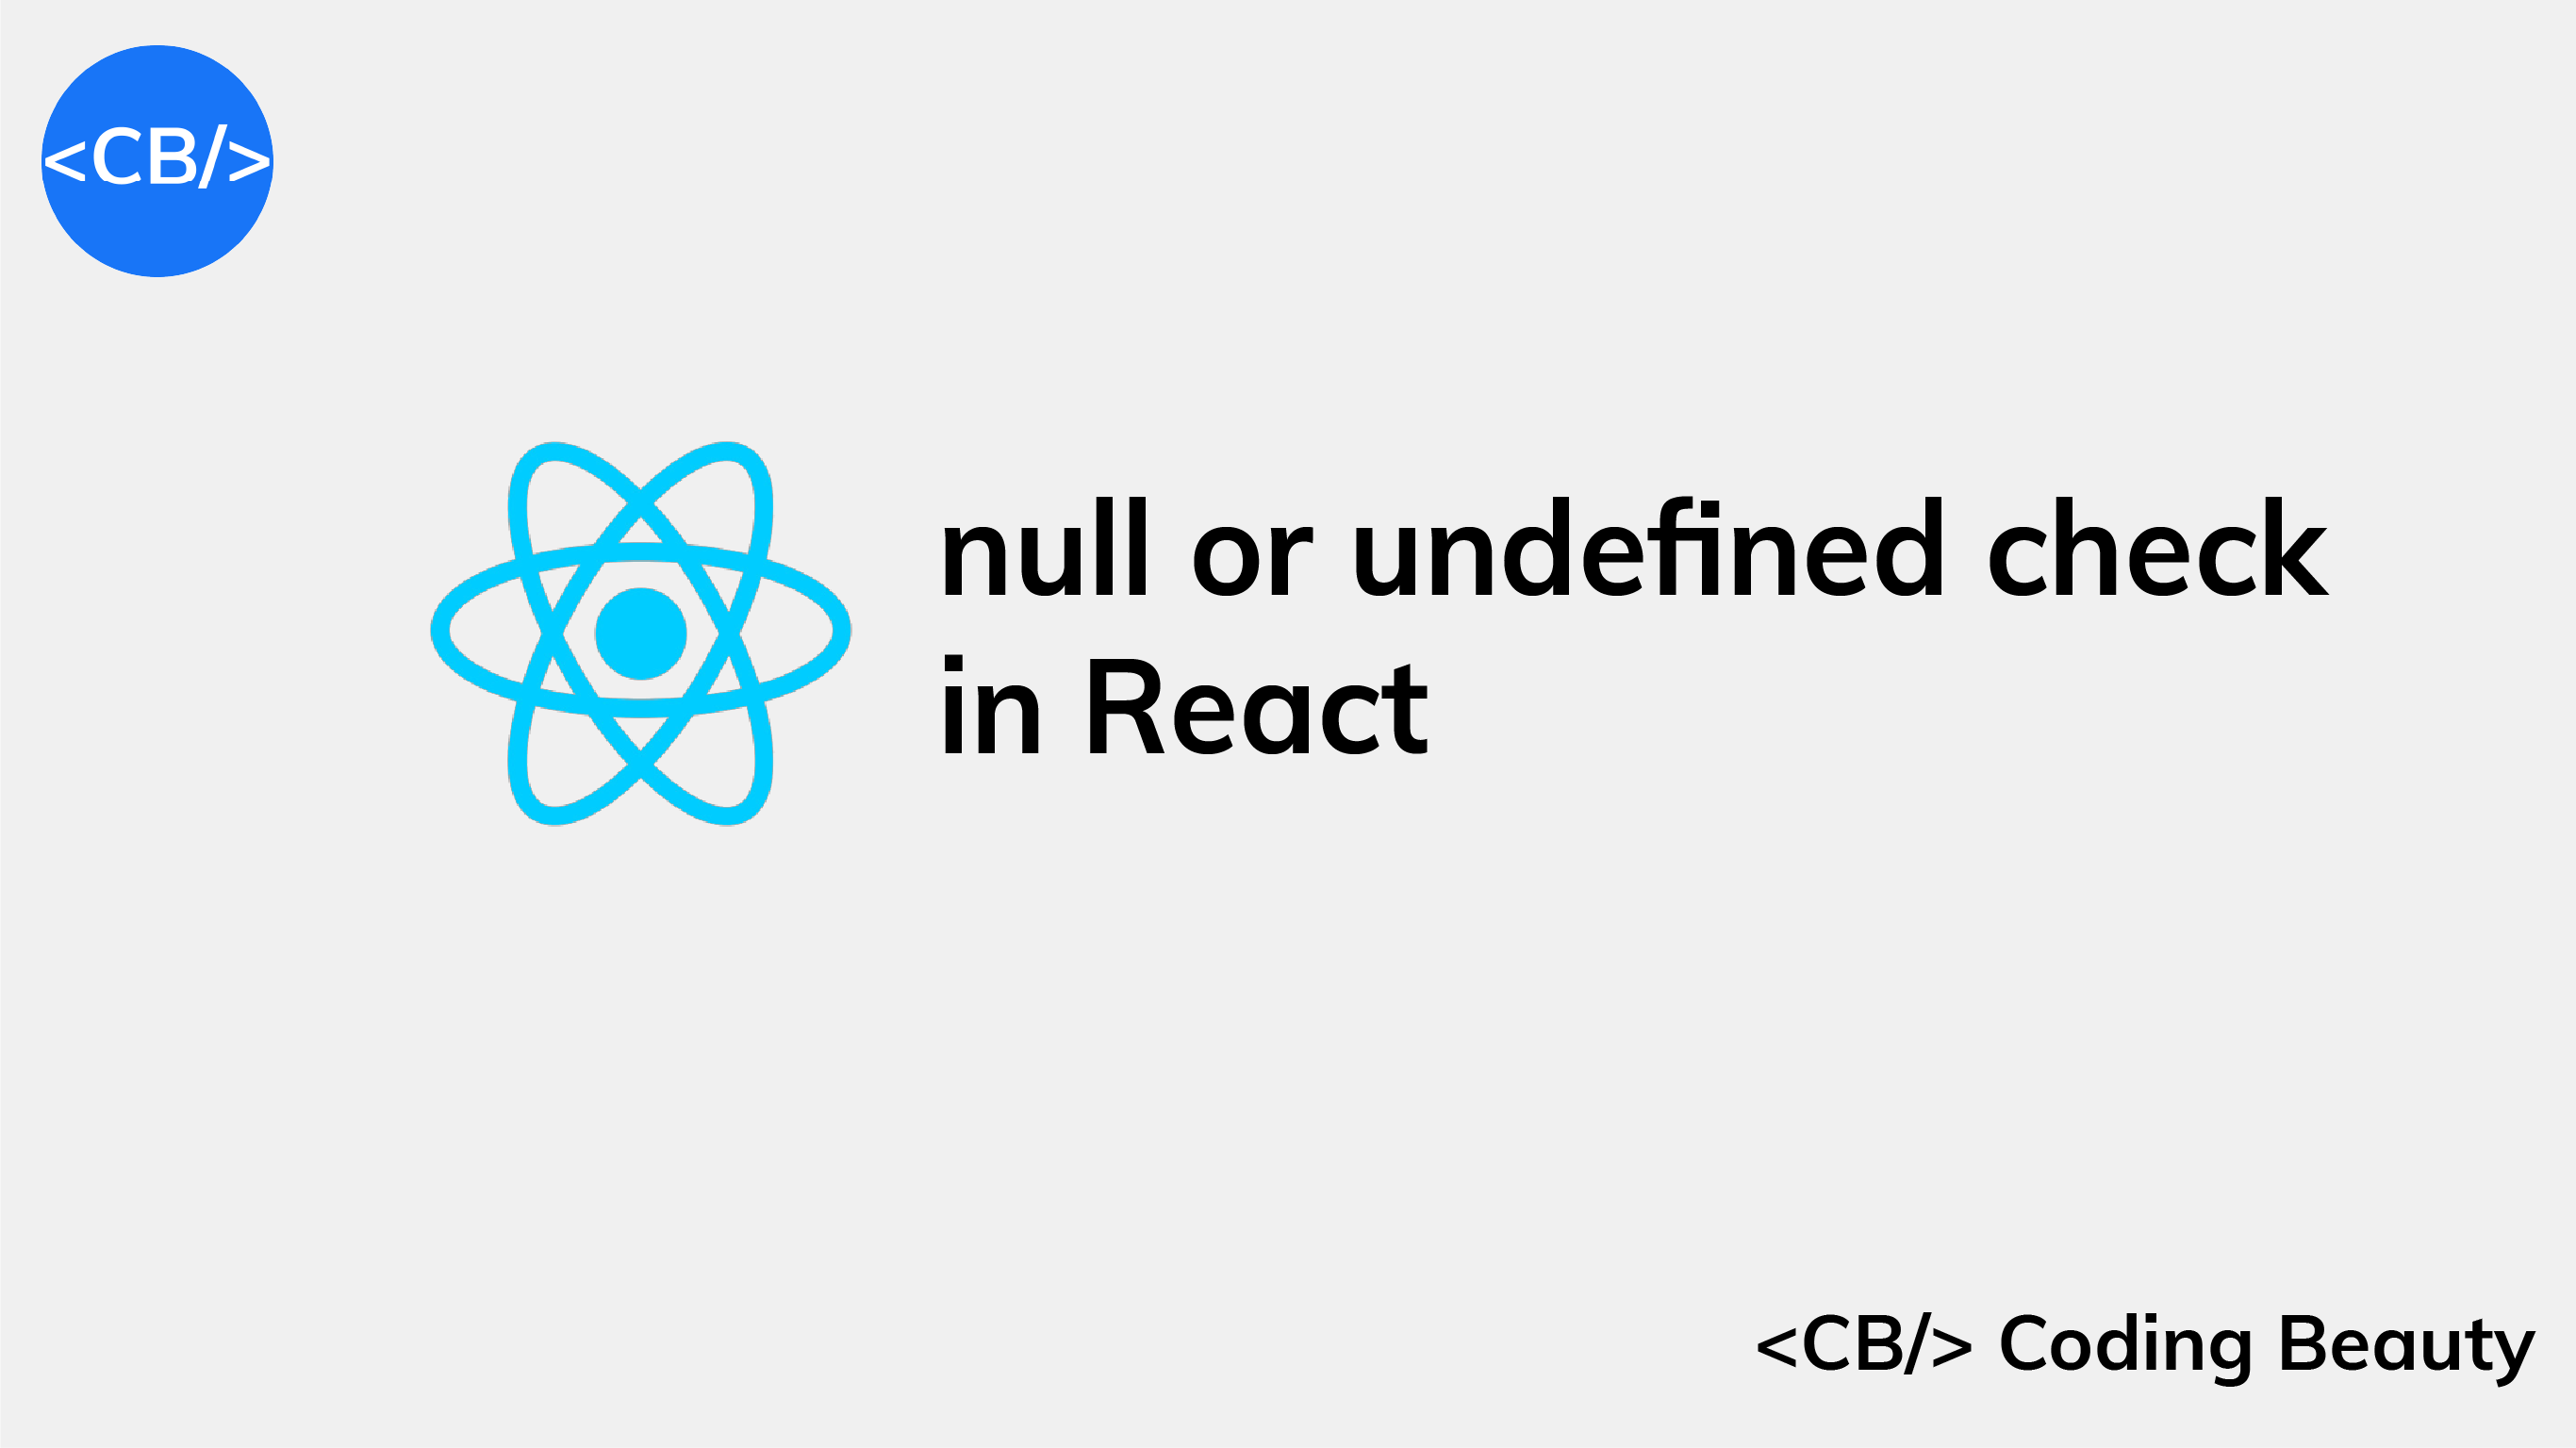 How to check if a variable is null or undefined in React